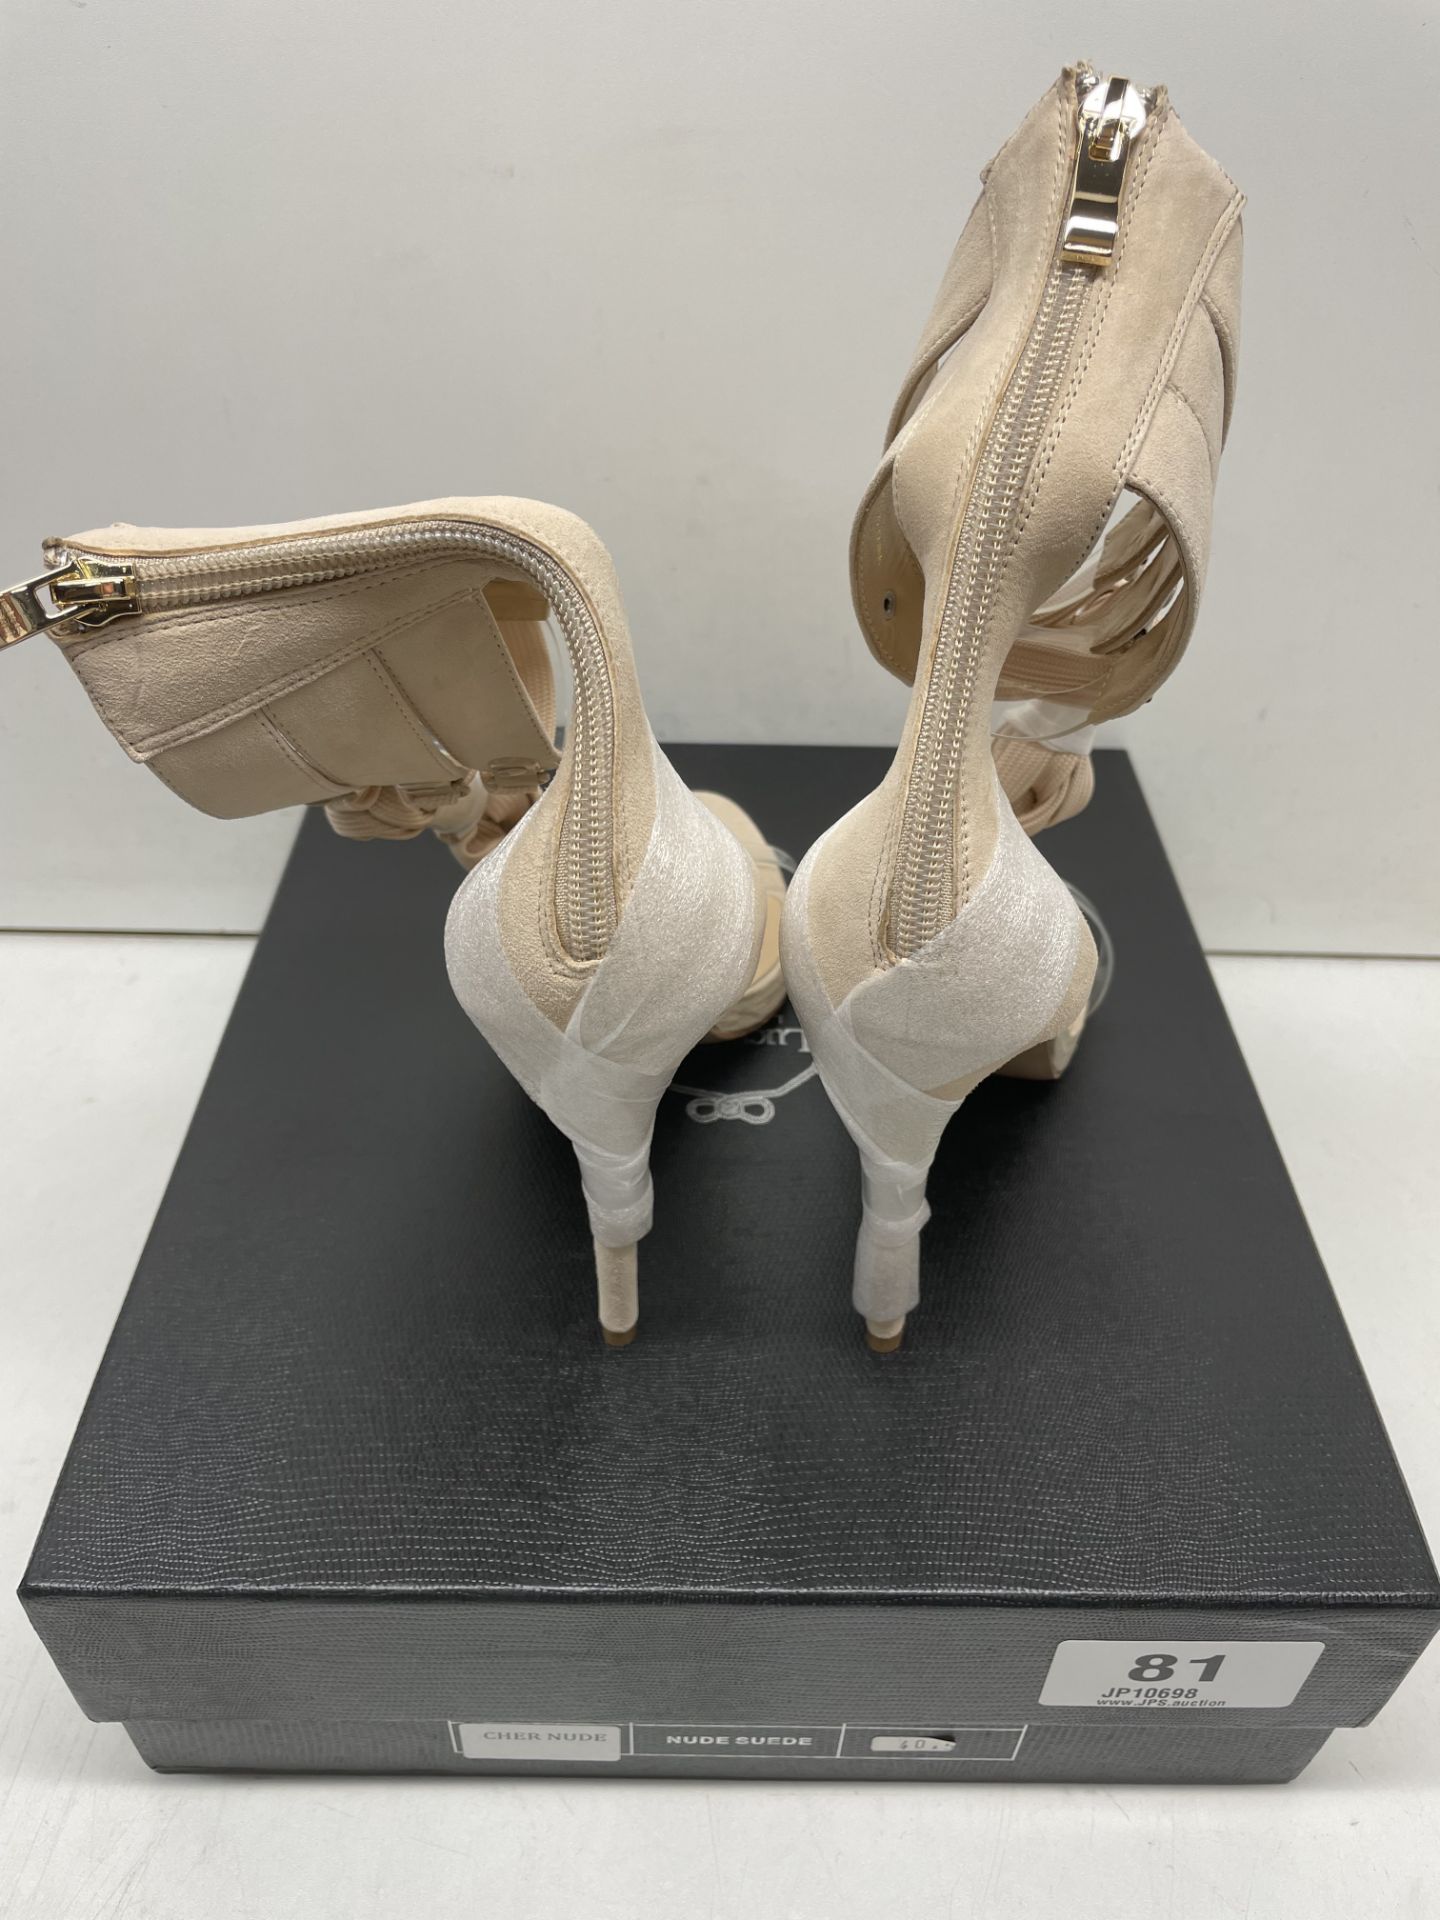 Ex-Display Lucy Choi High Heel Stiletto Shoes | Eur 40.5 - Image 2 of 4